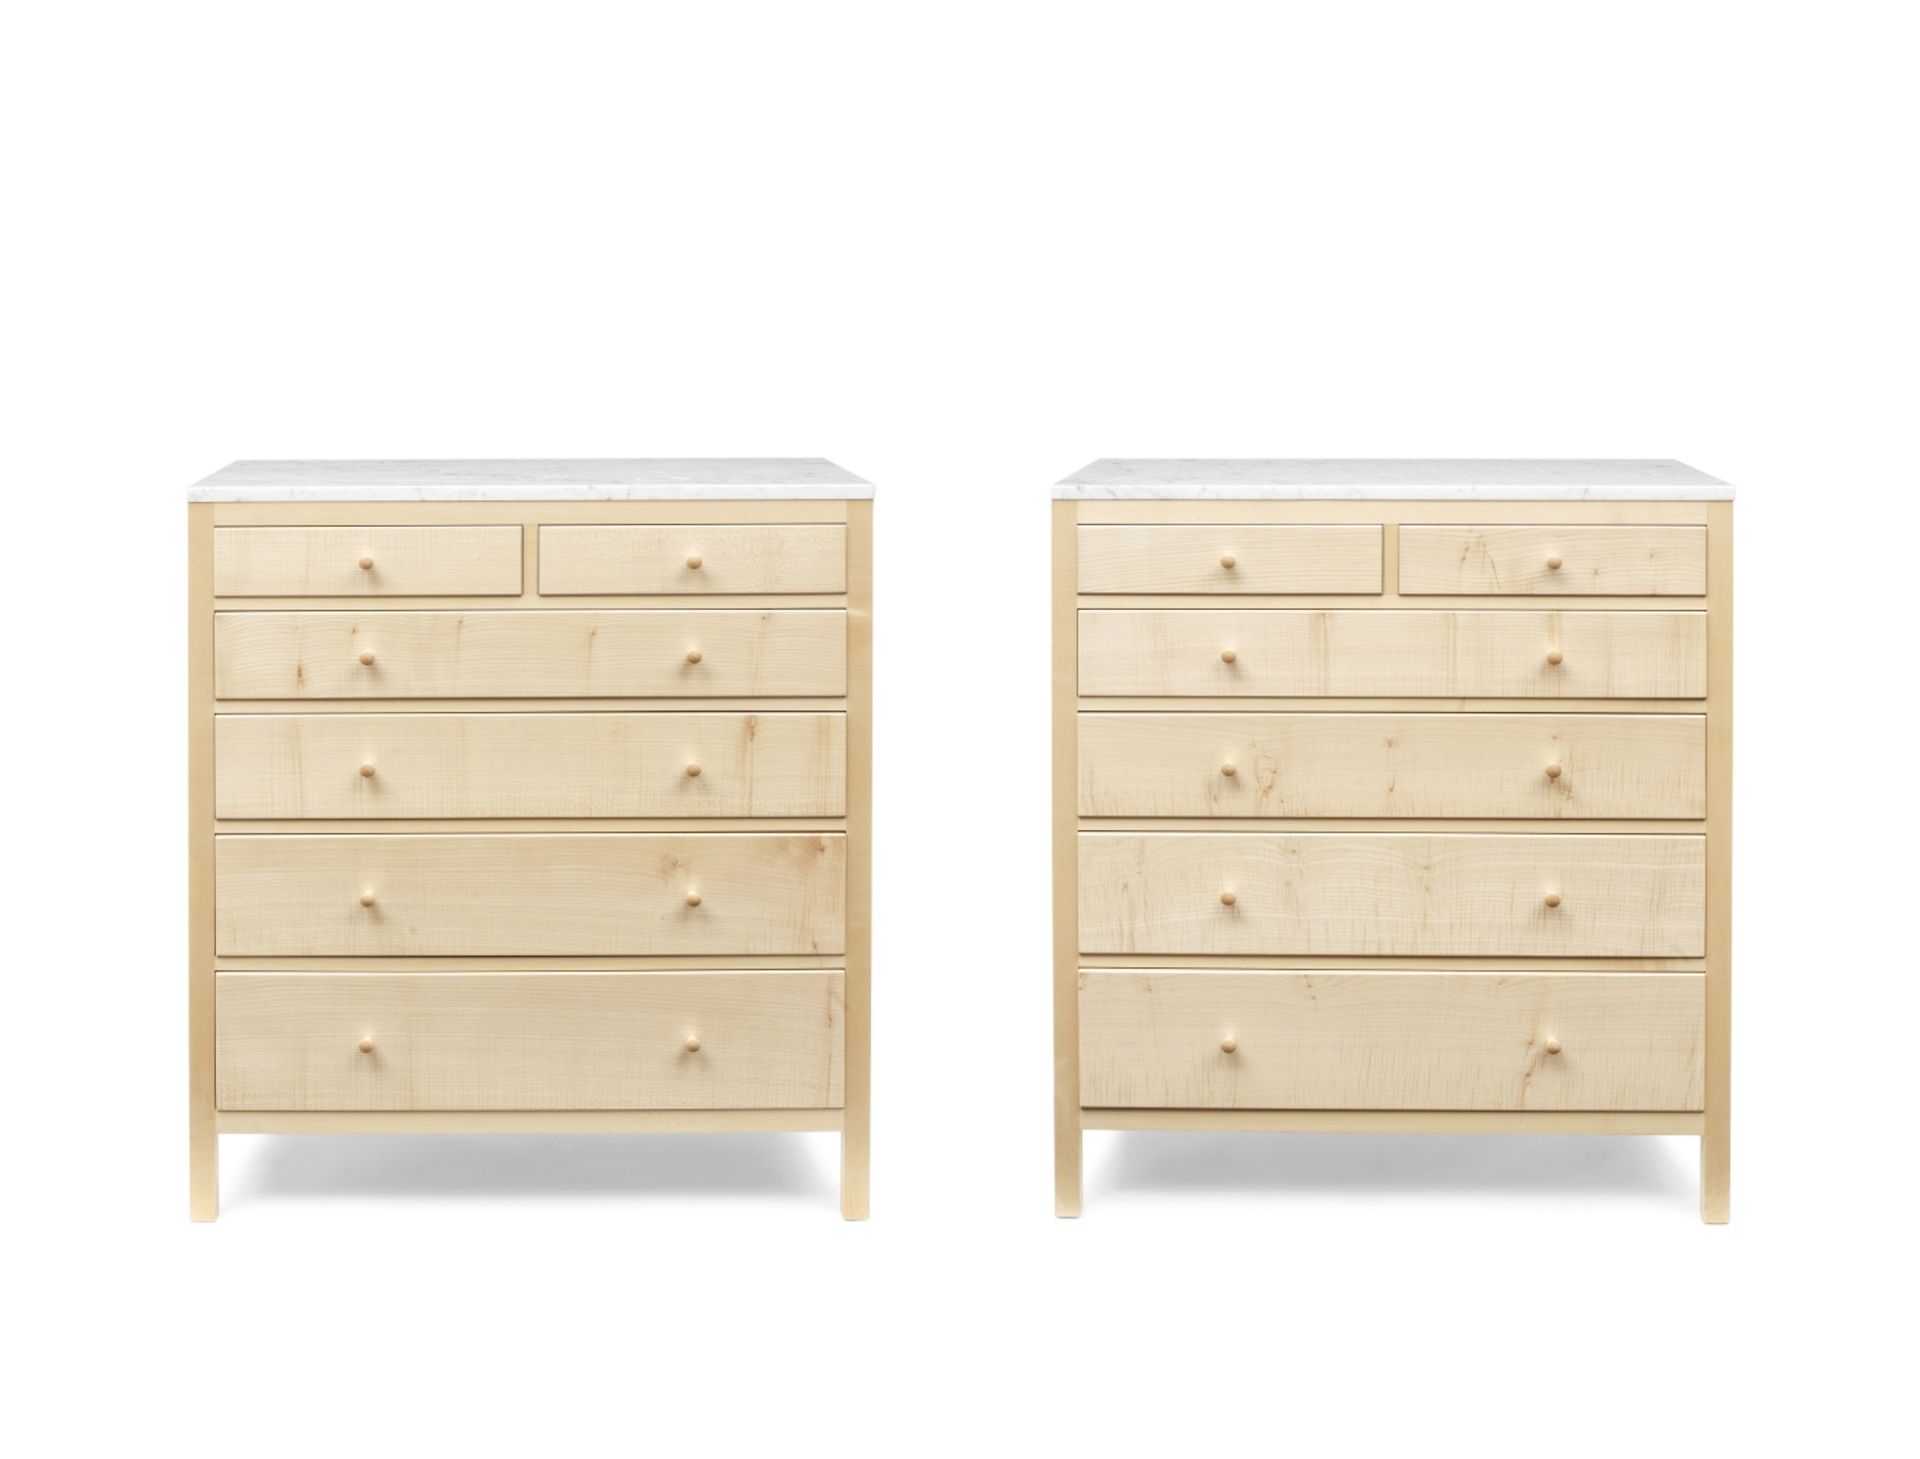 A pair of maple 'Honor' chests Designed by Sir Terence Conran, made by Benchmark Furniture (2)